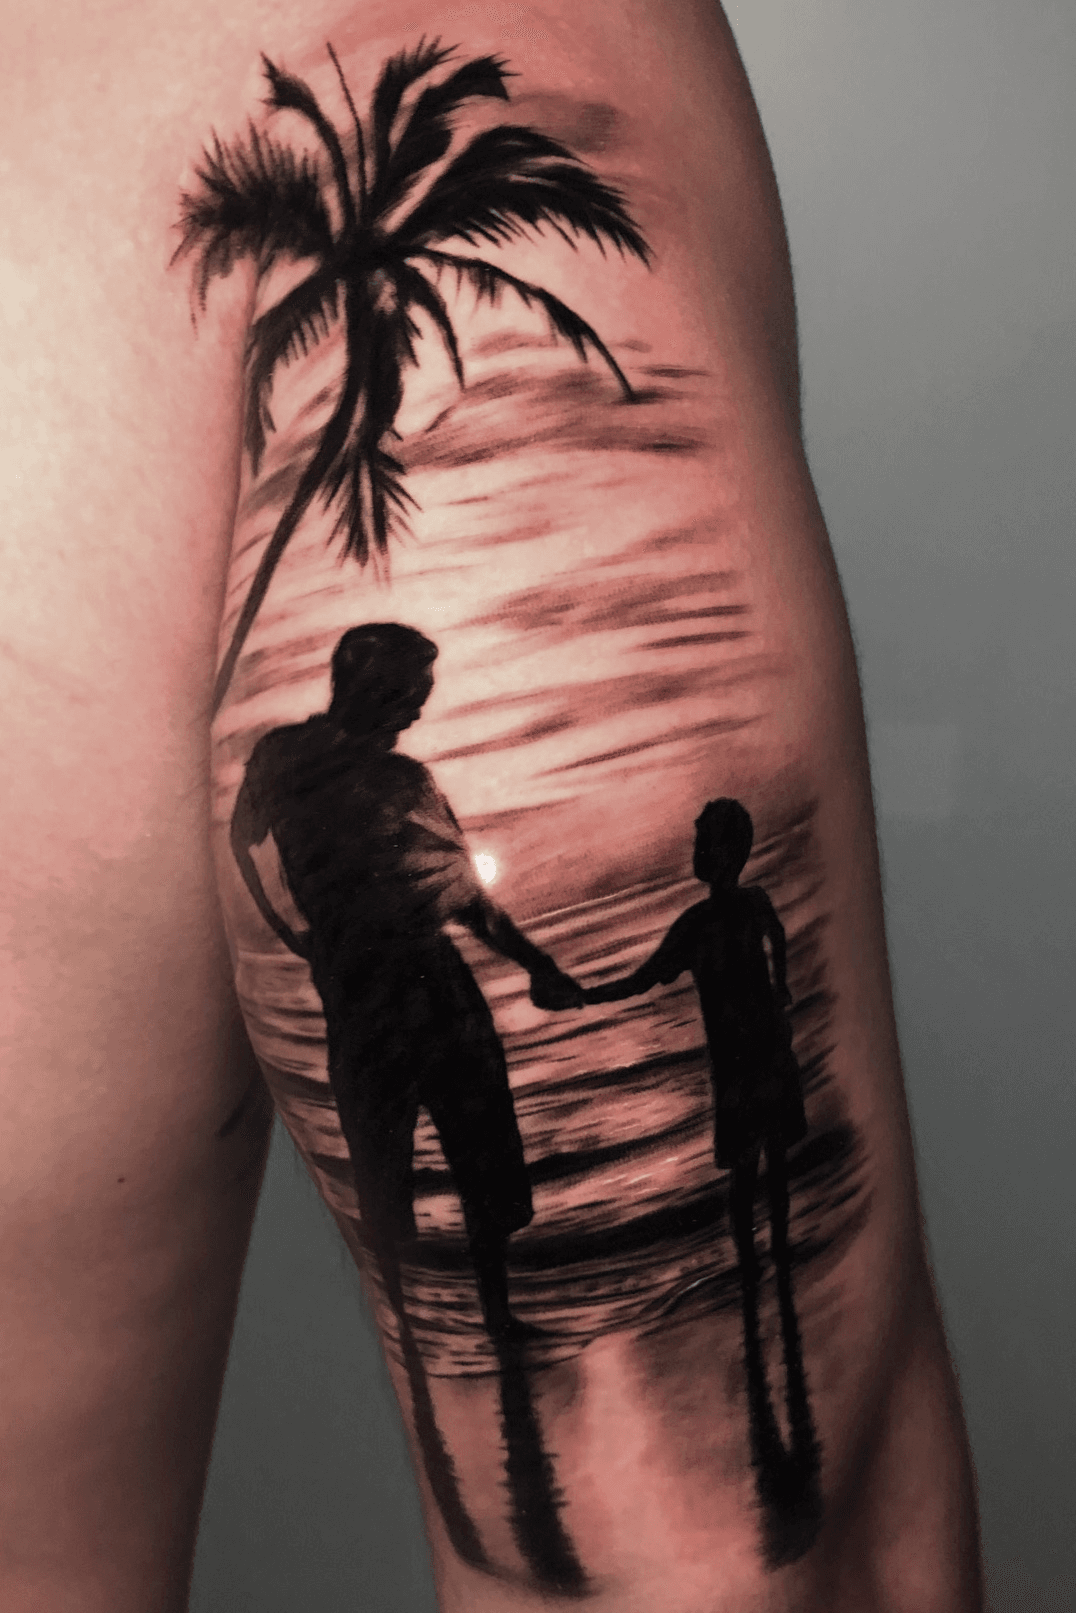 101 Amazing Father and Son Tattoo Ideas That Will Blow Your Mind  Tattoo  for son Tattoos for your son Father tattoos